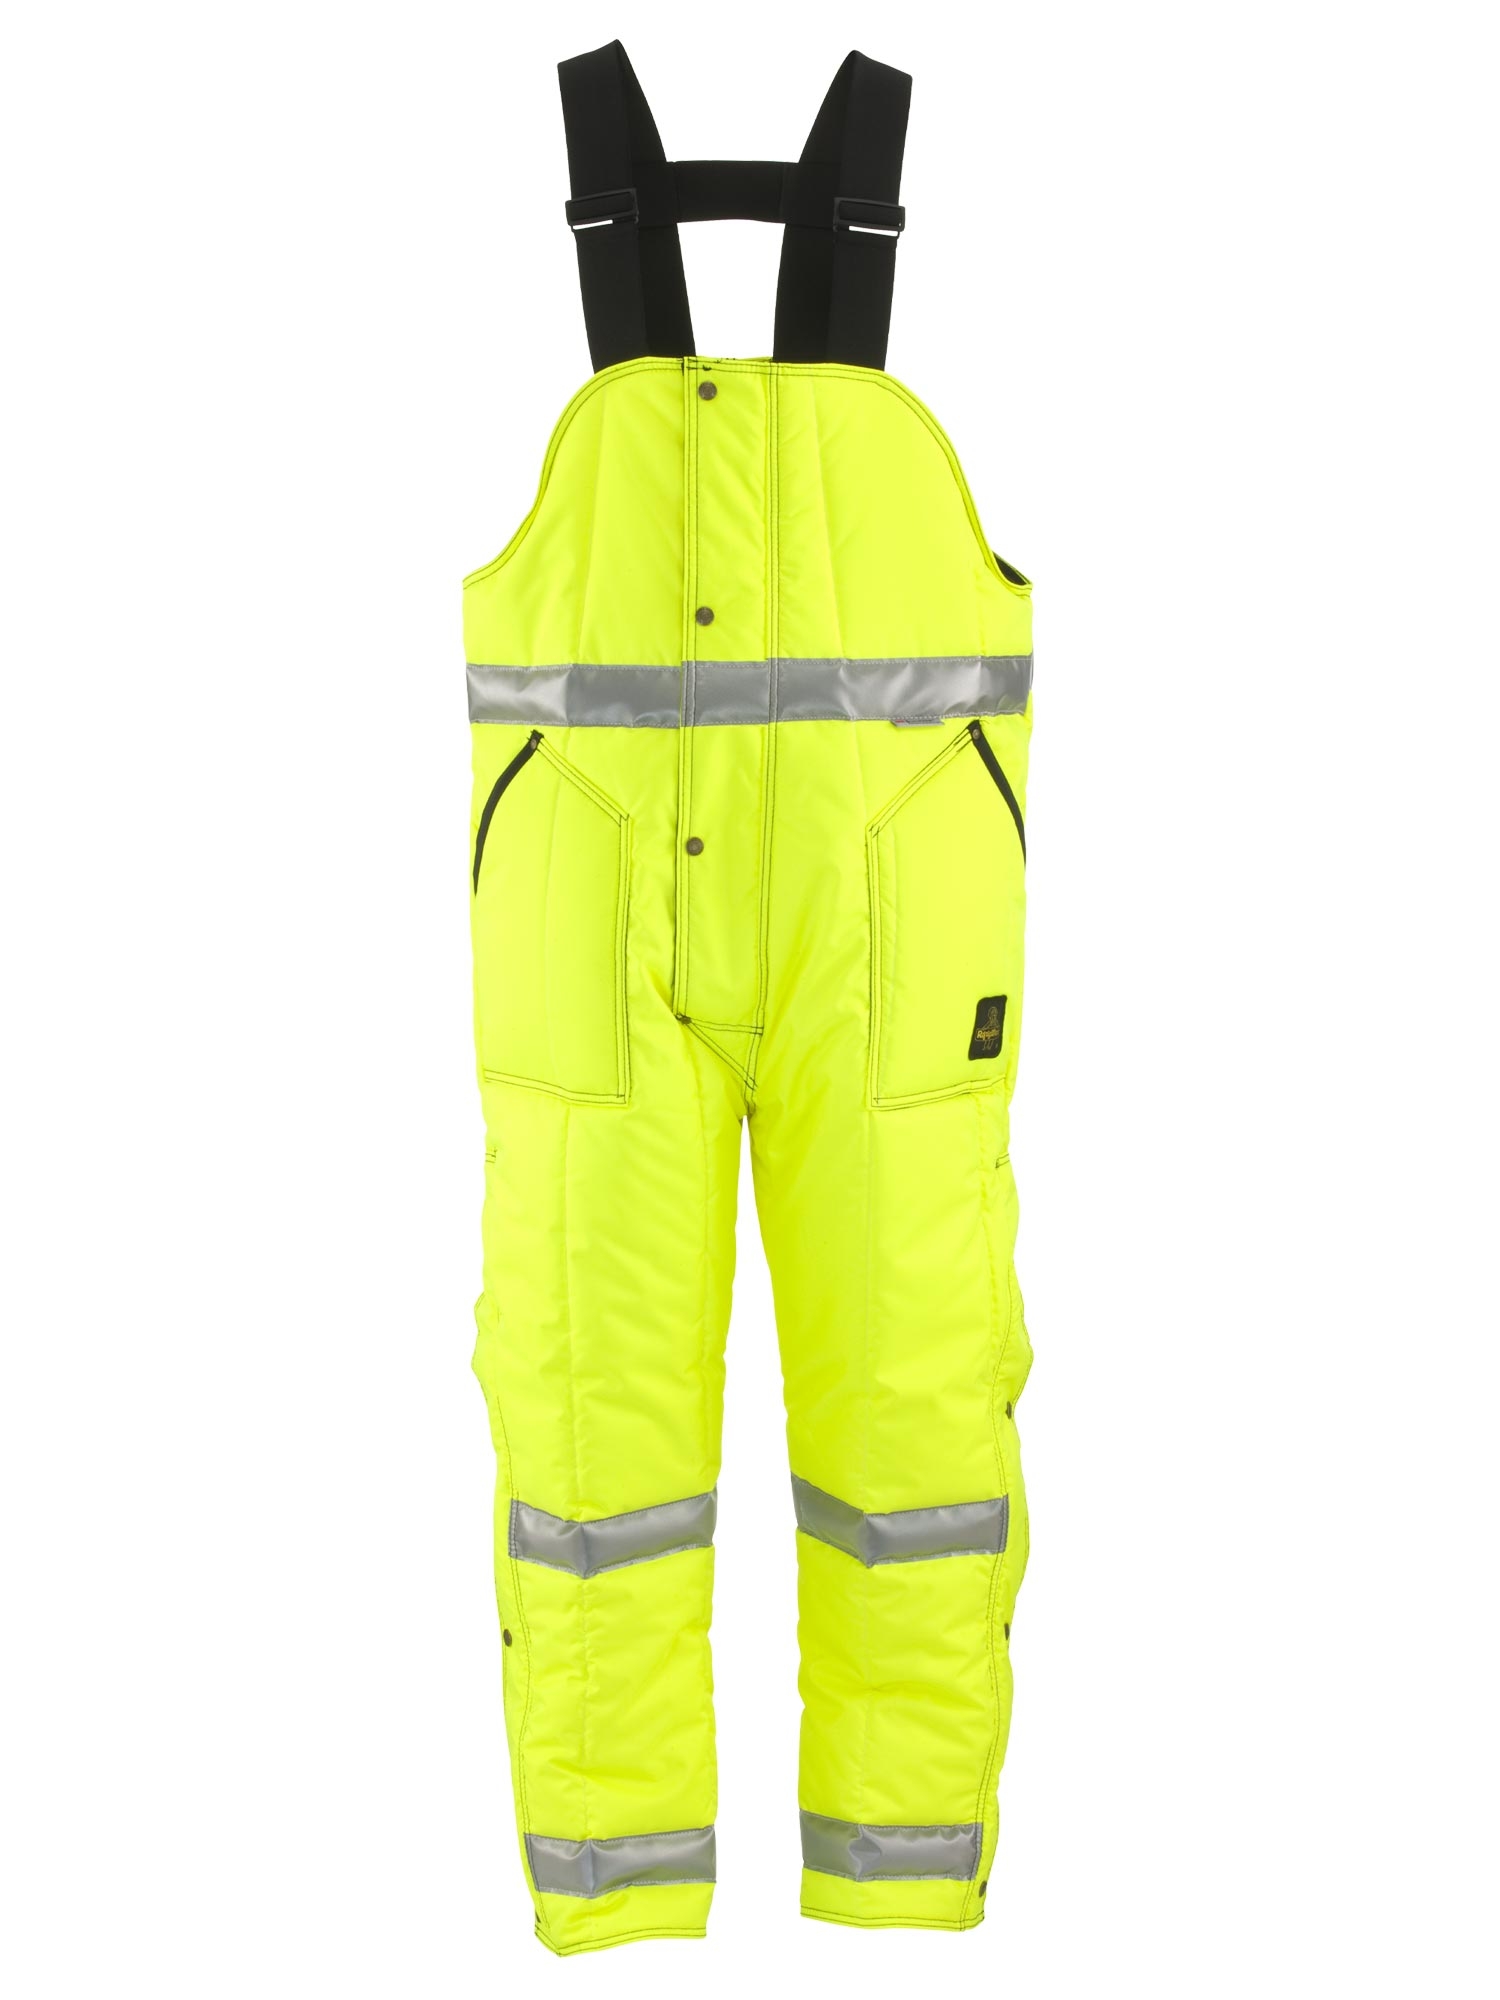 RefrigiWear HiVis Iron-Tuff® Bib Overalls with Reflective Tape | Lime/Silver | Fit: Big & Tall | Ragg Wool/Polyester/Nylon | 2XL